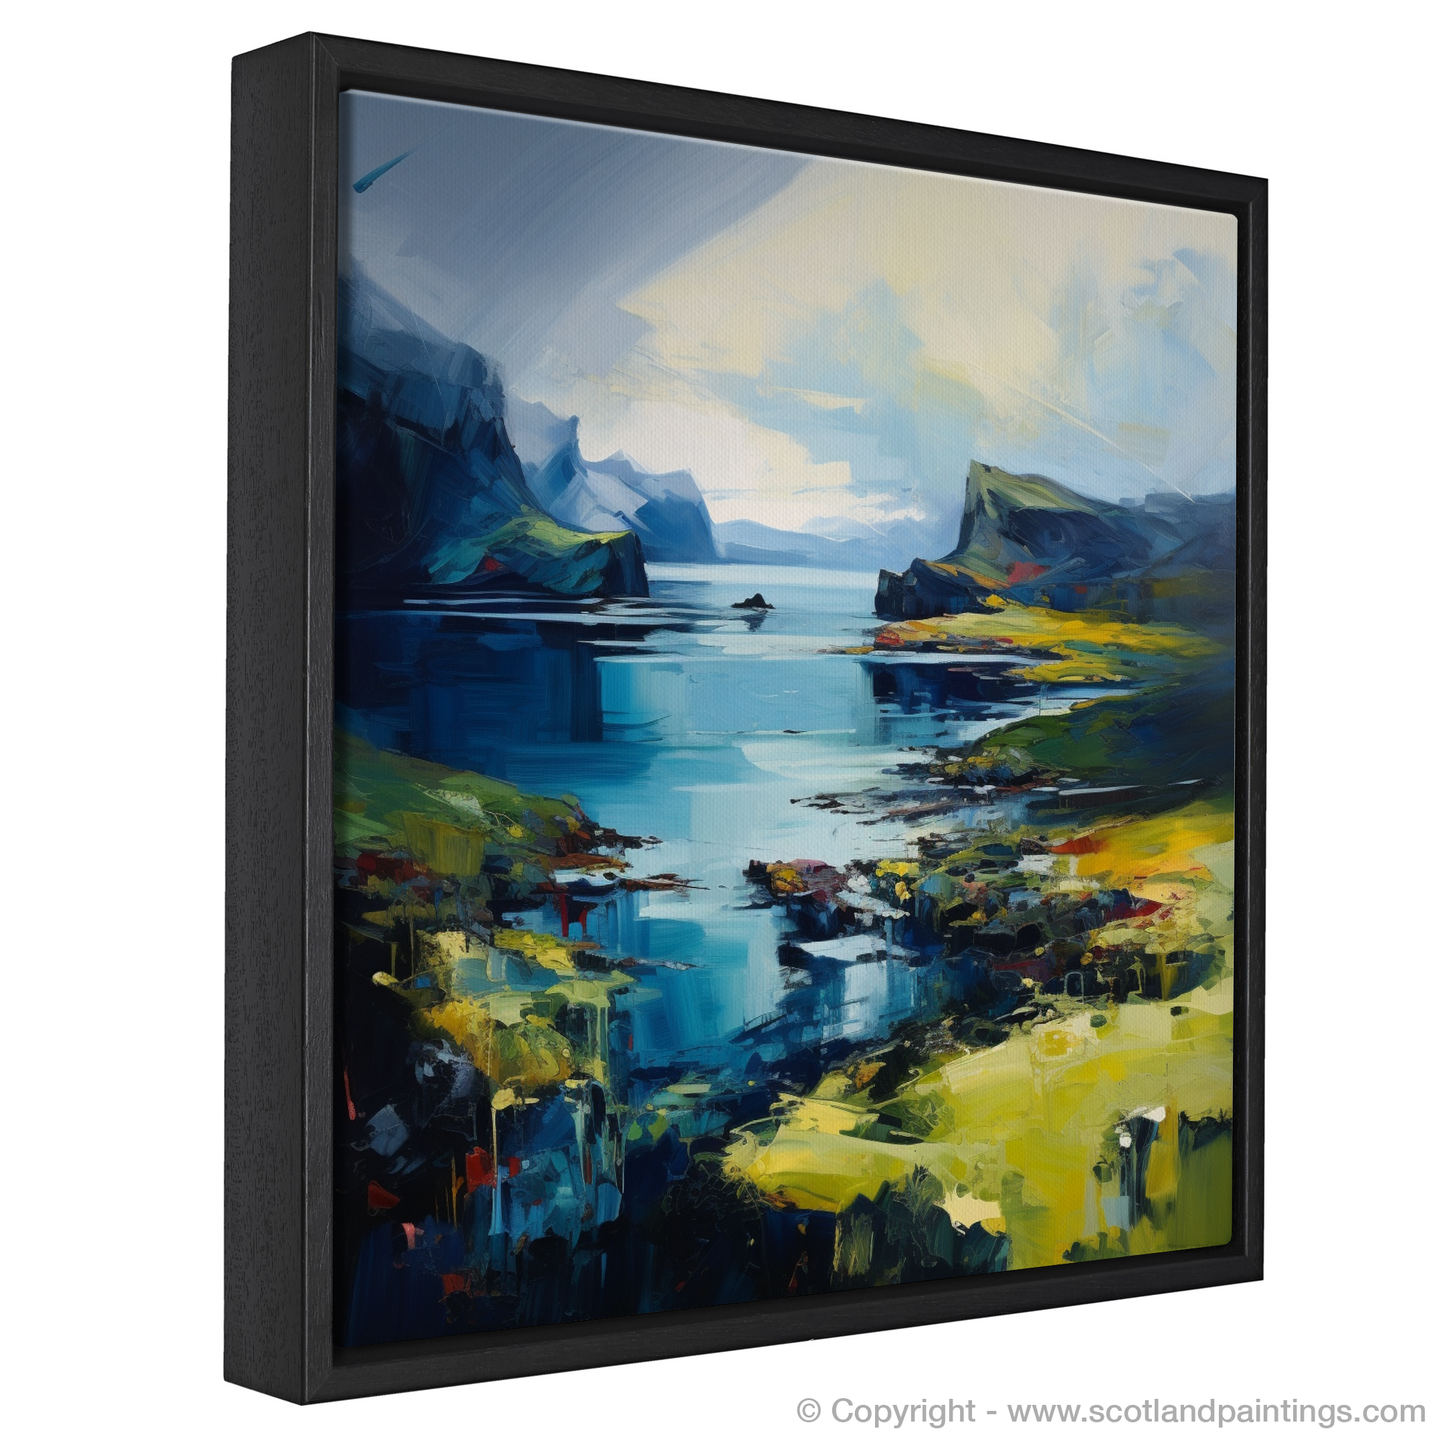 Painting and Art Print of Isle of Skye's smaller isles, Inner Hebrides entitled "Isle of Skye's Wild Isles: An Expressionist Ode".